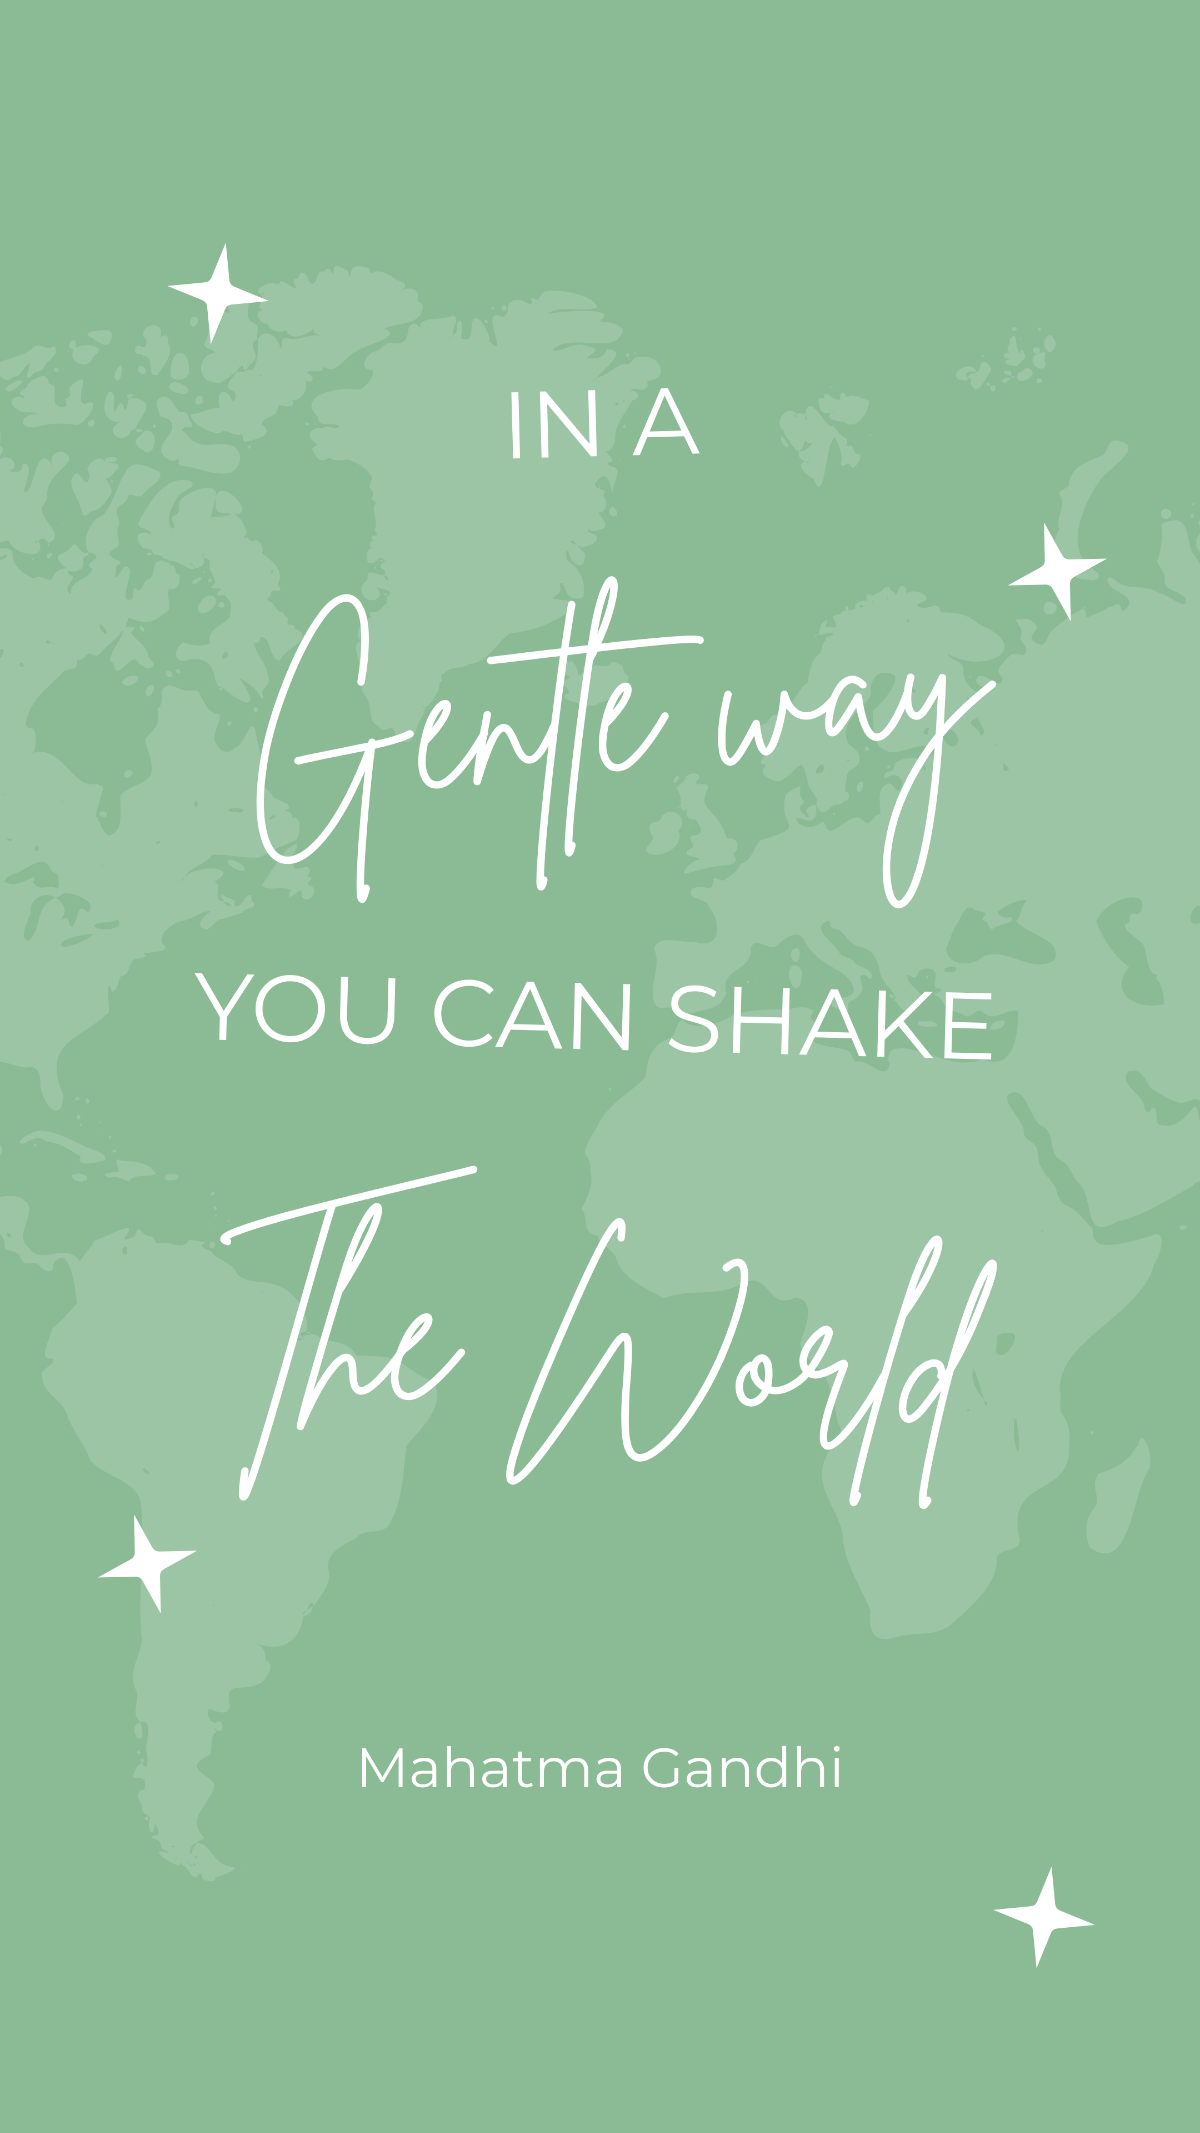 Mahatma Gandhi - In a gentle way you can shake the world. Template